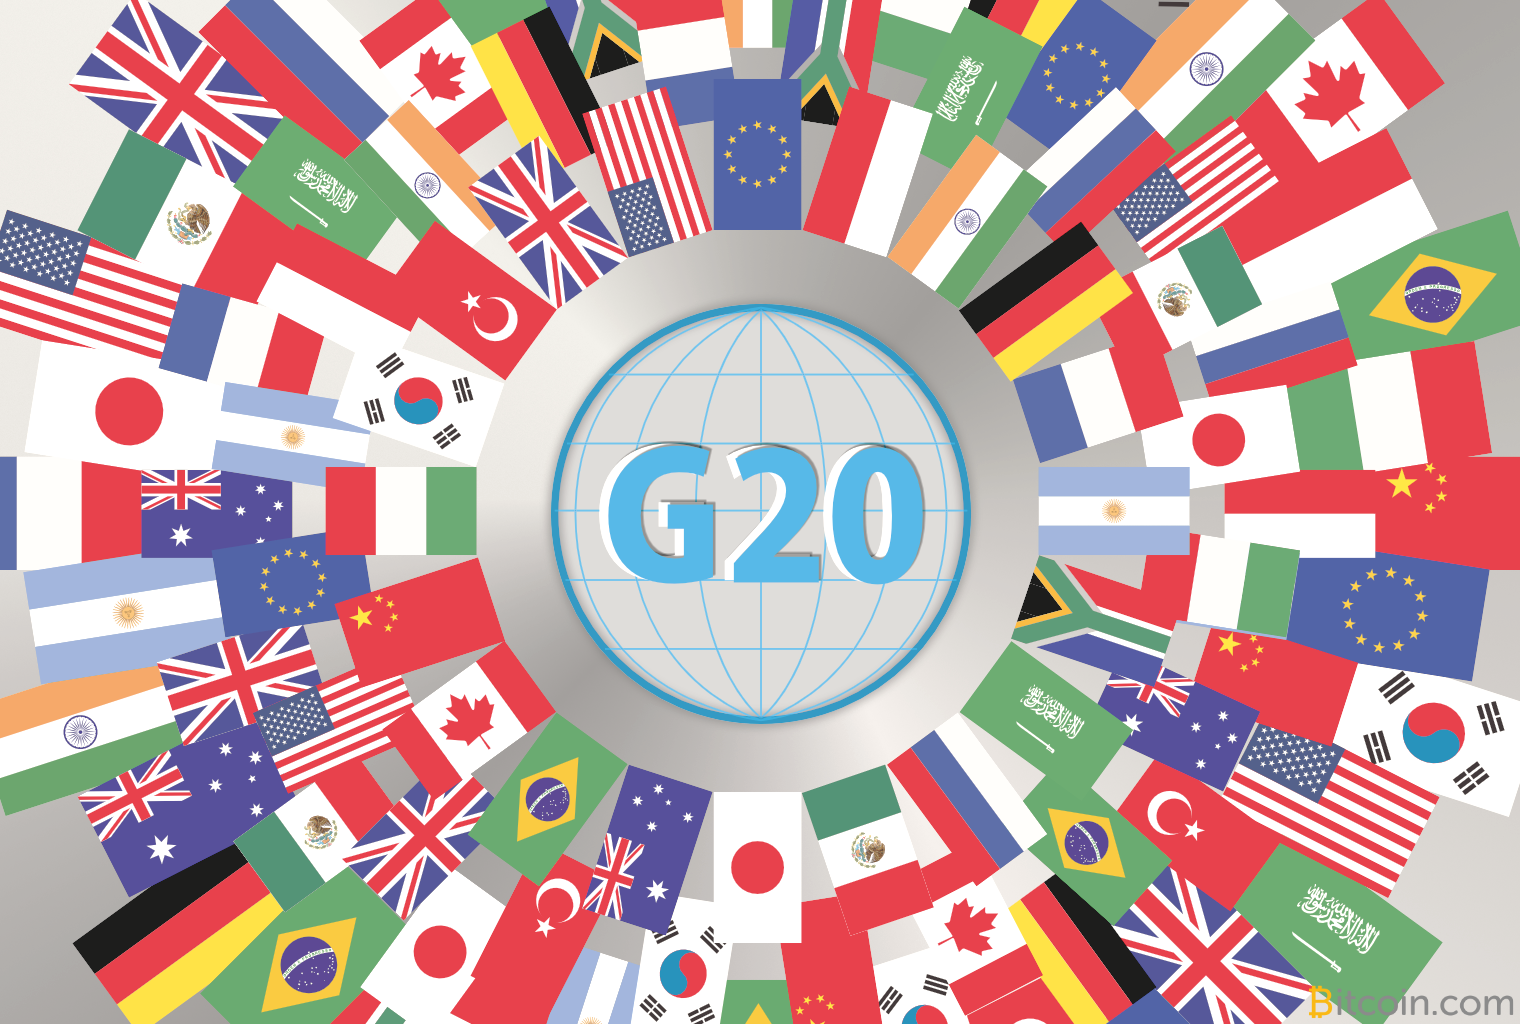 G20 Prepares to Regulate Crypto Assets - a Look at Current Policies